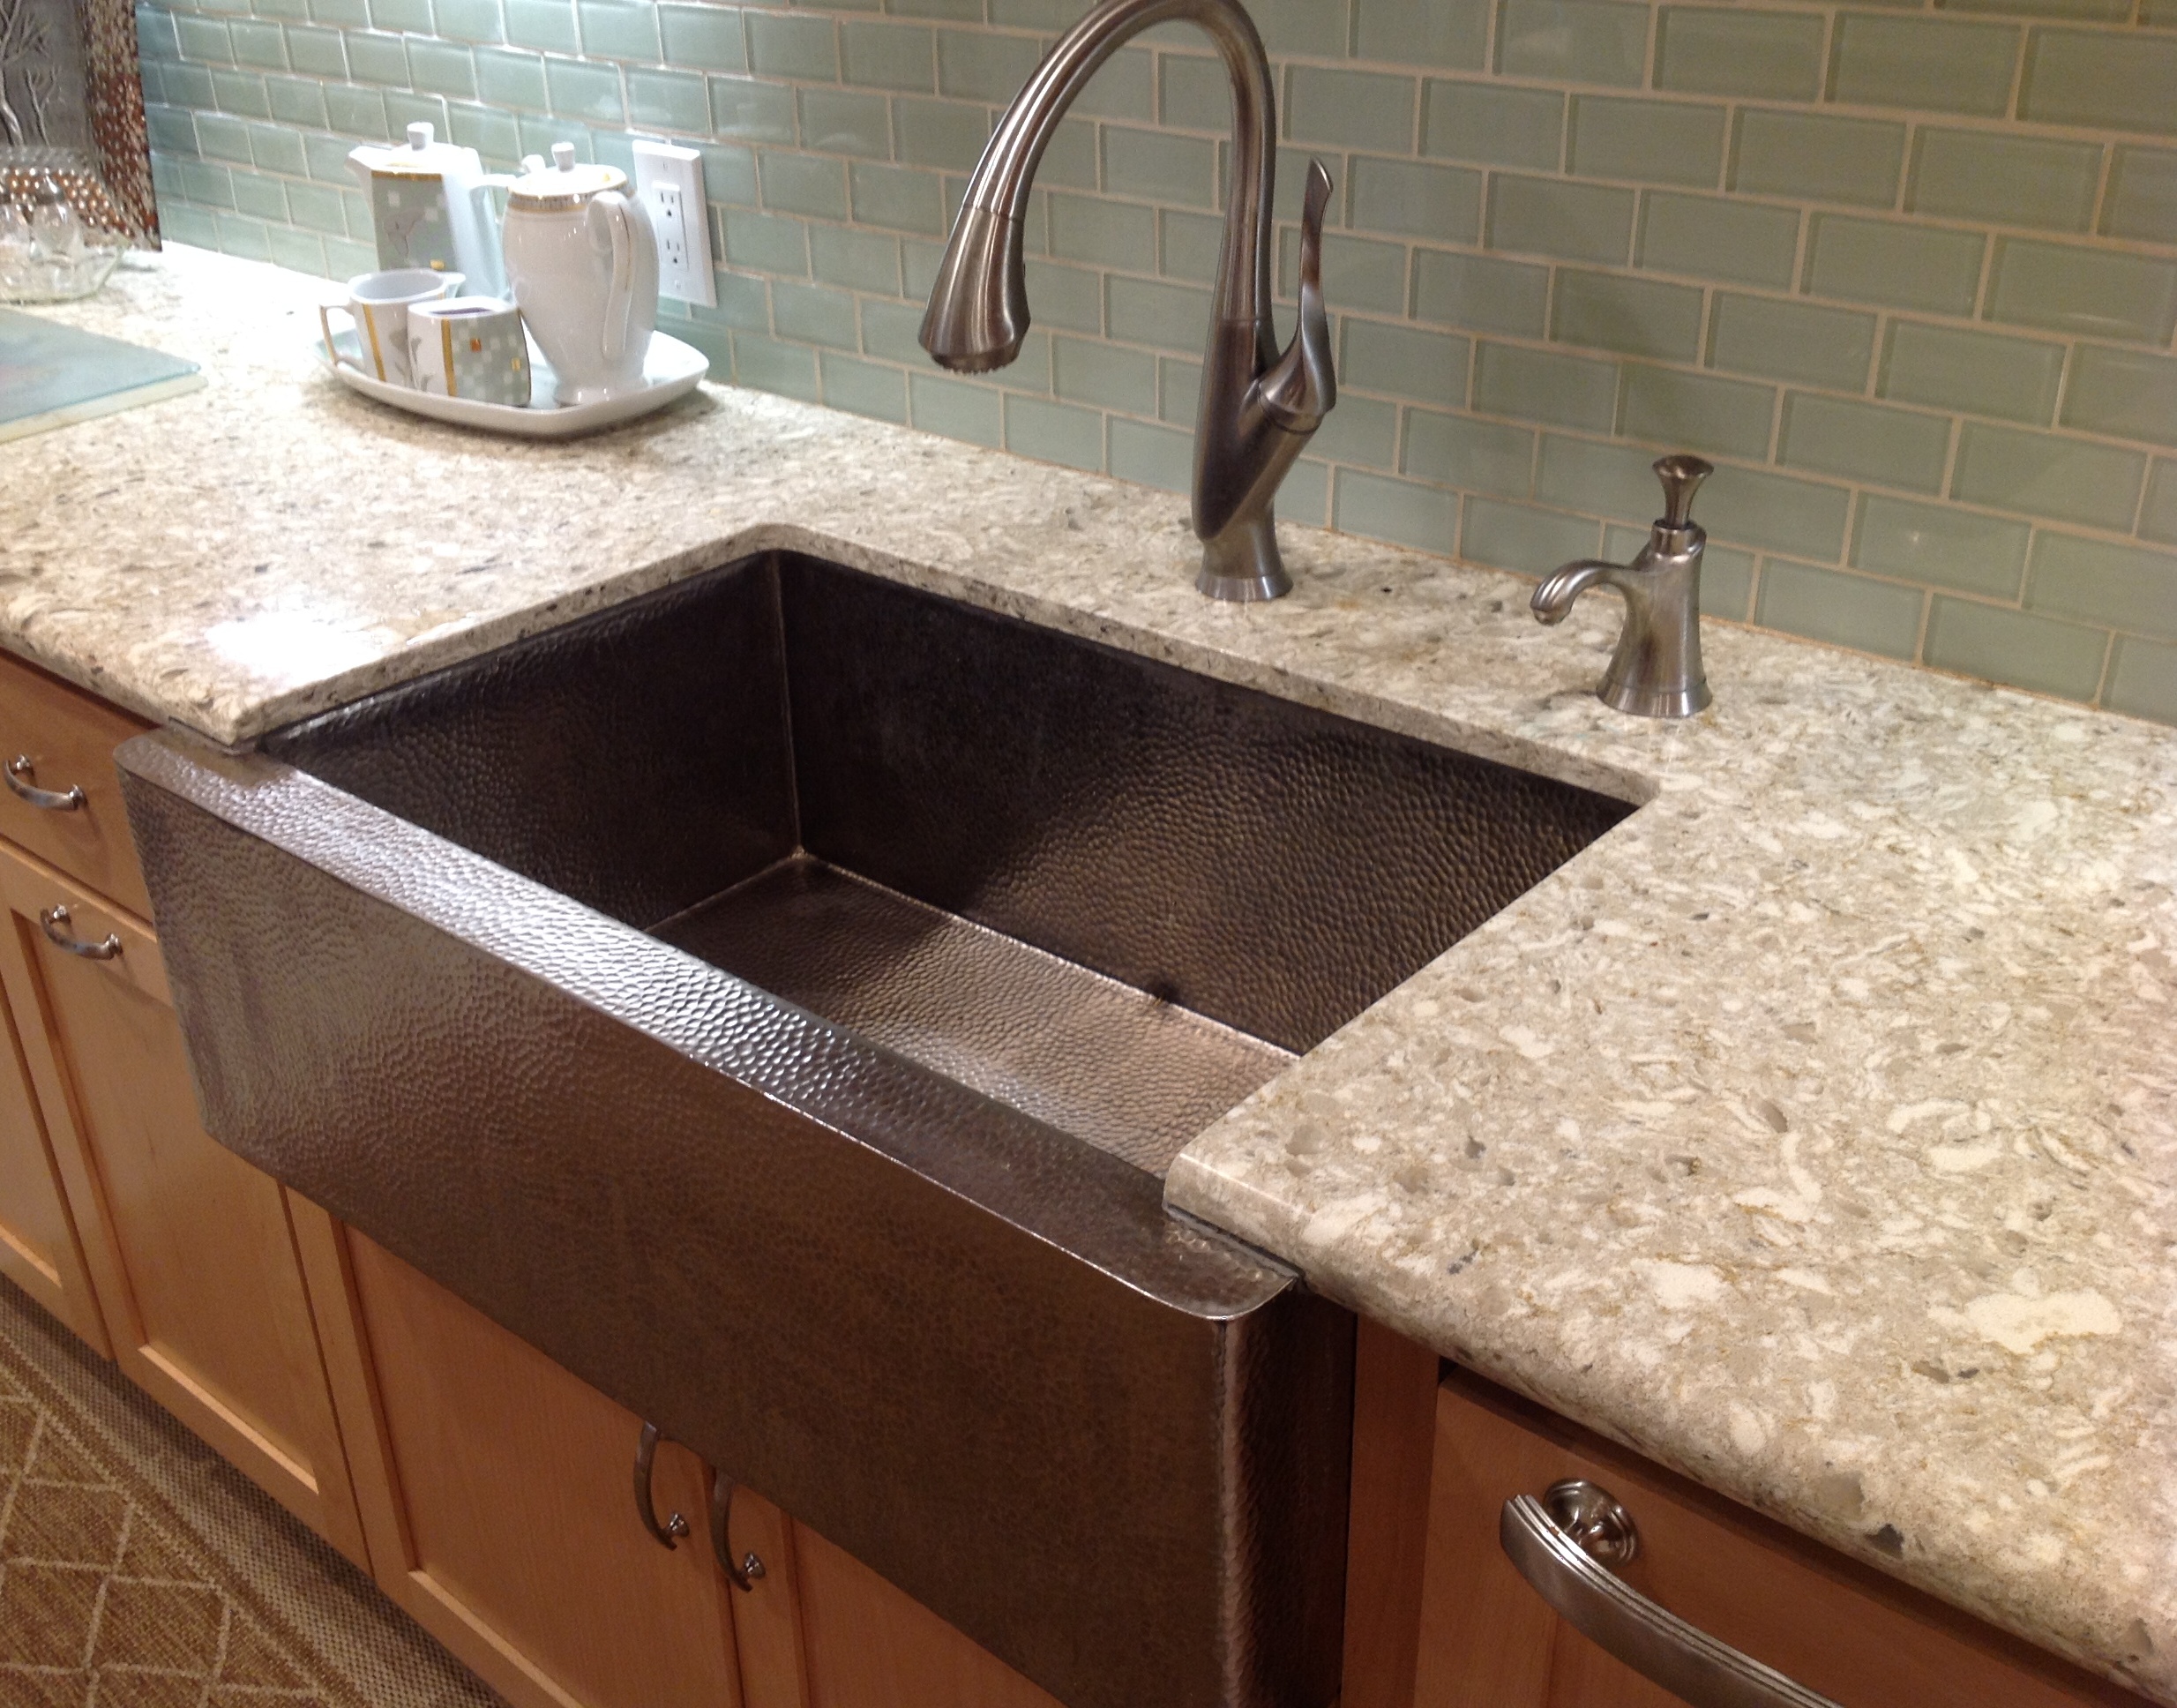 4 Reasons Why Your Kitchen Sink Smells Bad